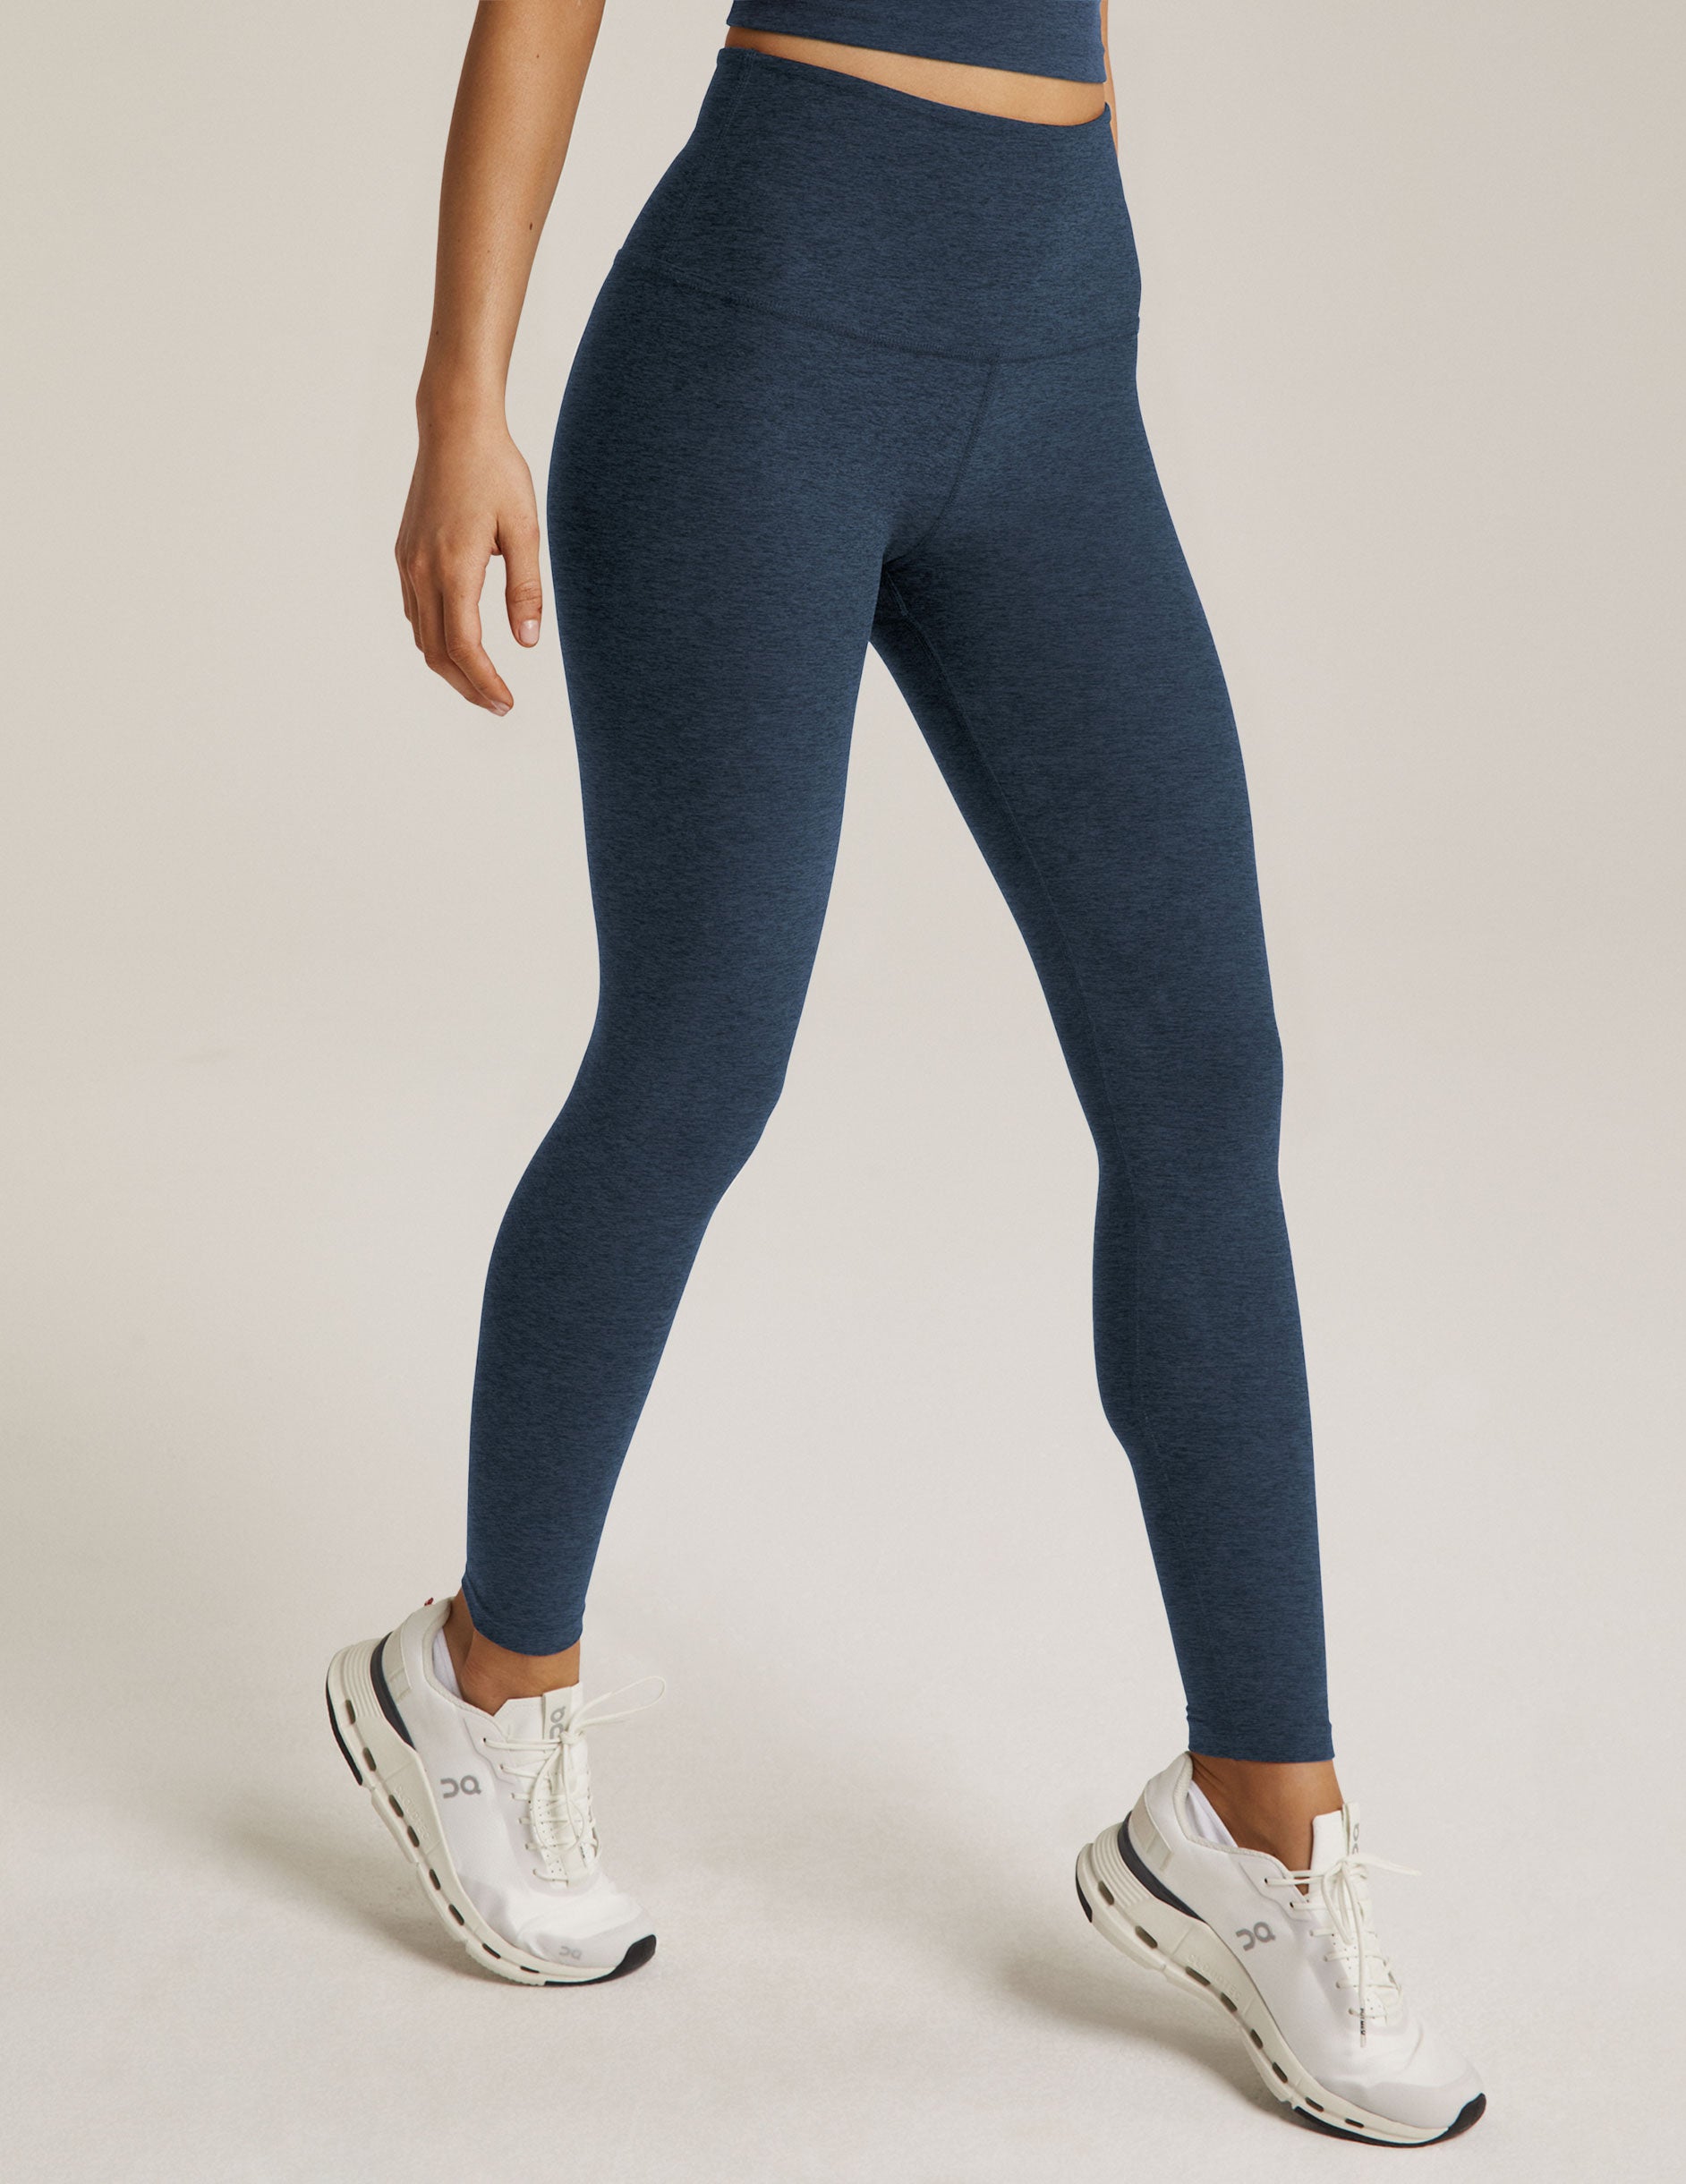 These Comfortable Beyond Yoga Leggings Are on Sale for Up to 30% Off